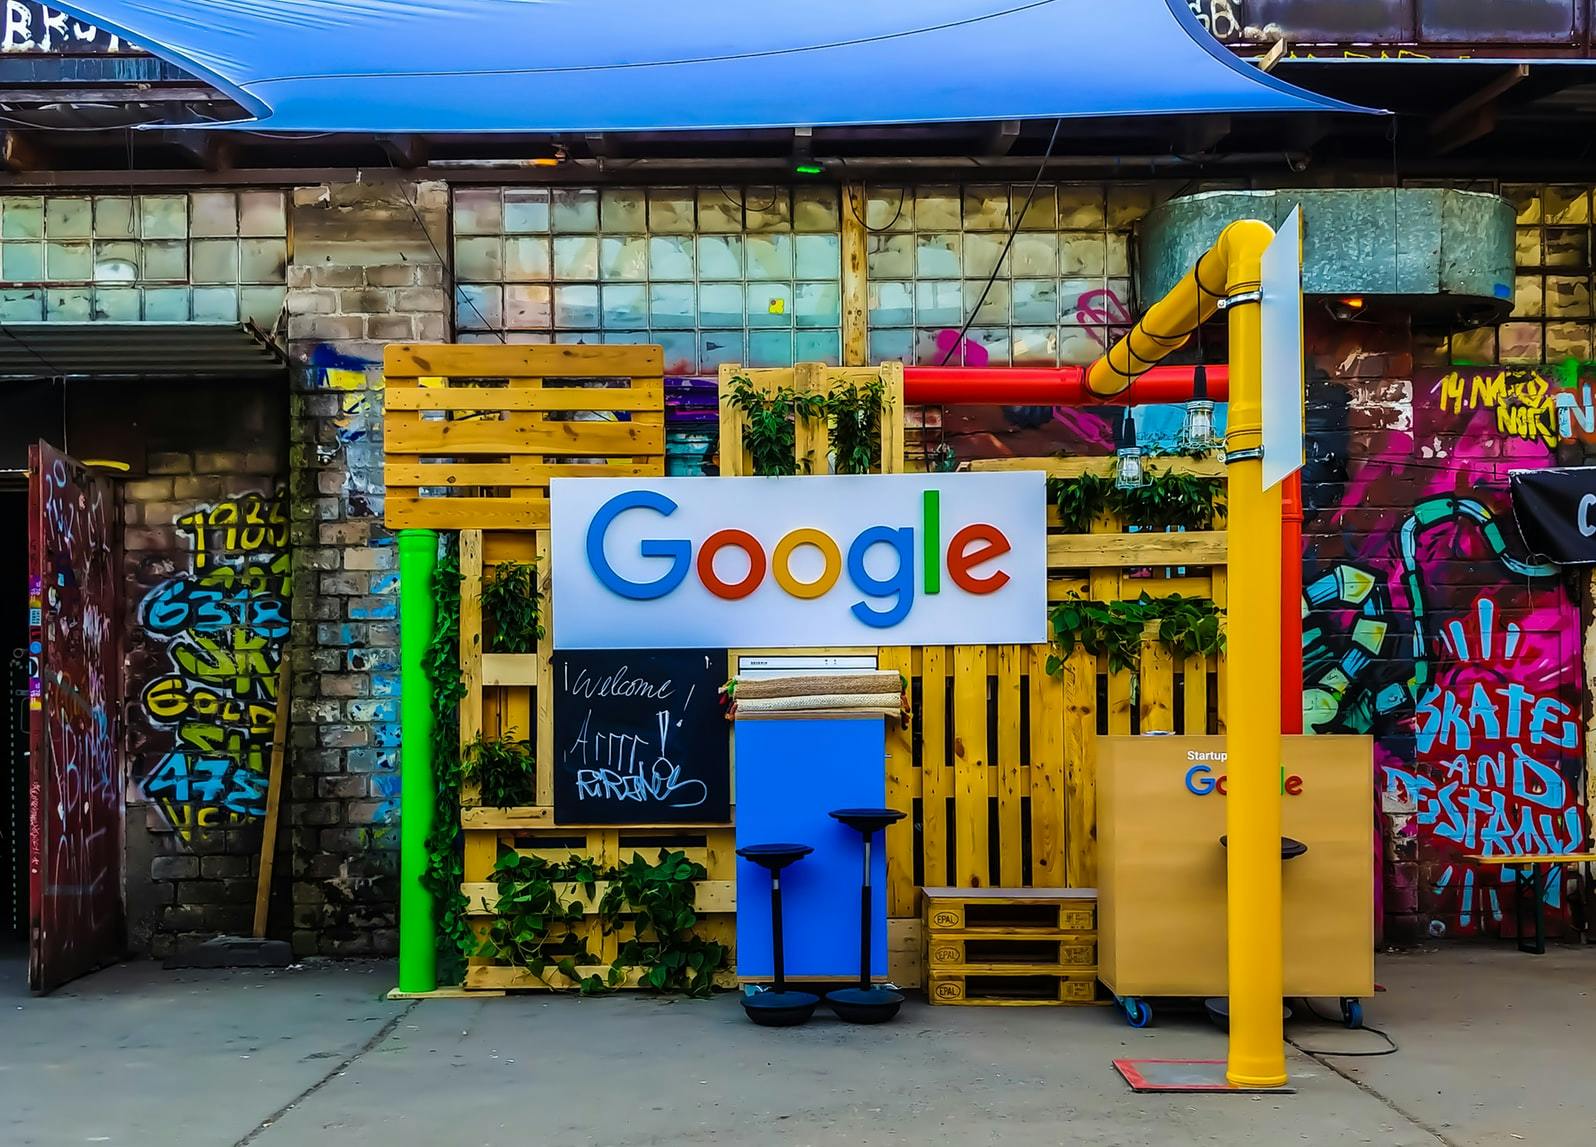 Google sign in front of a colorful building